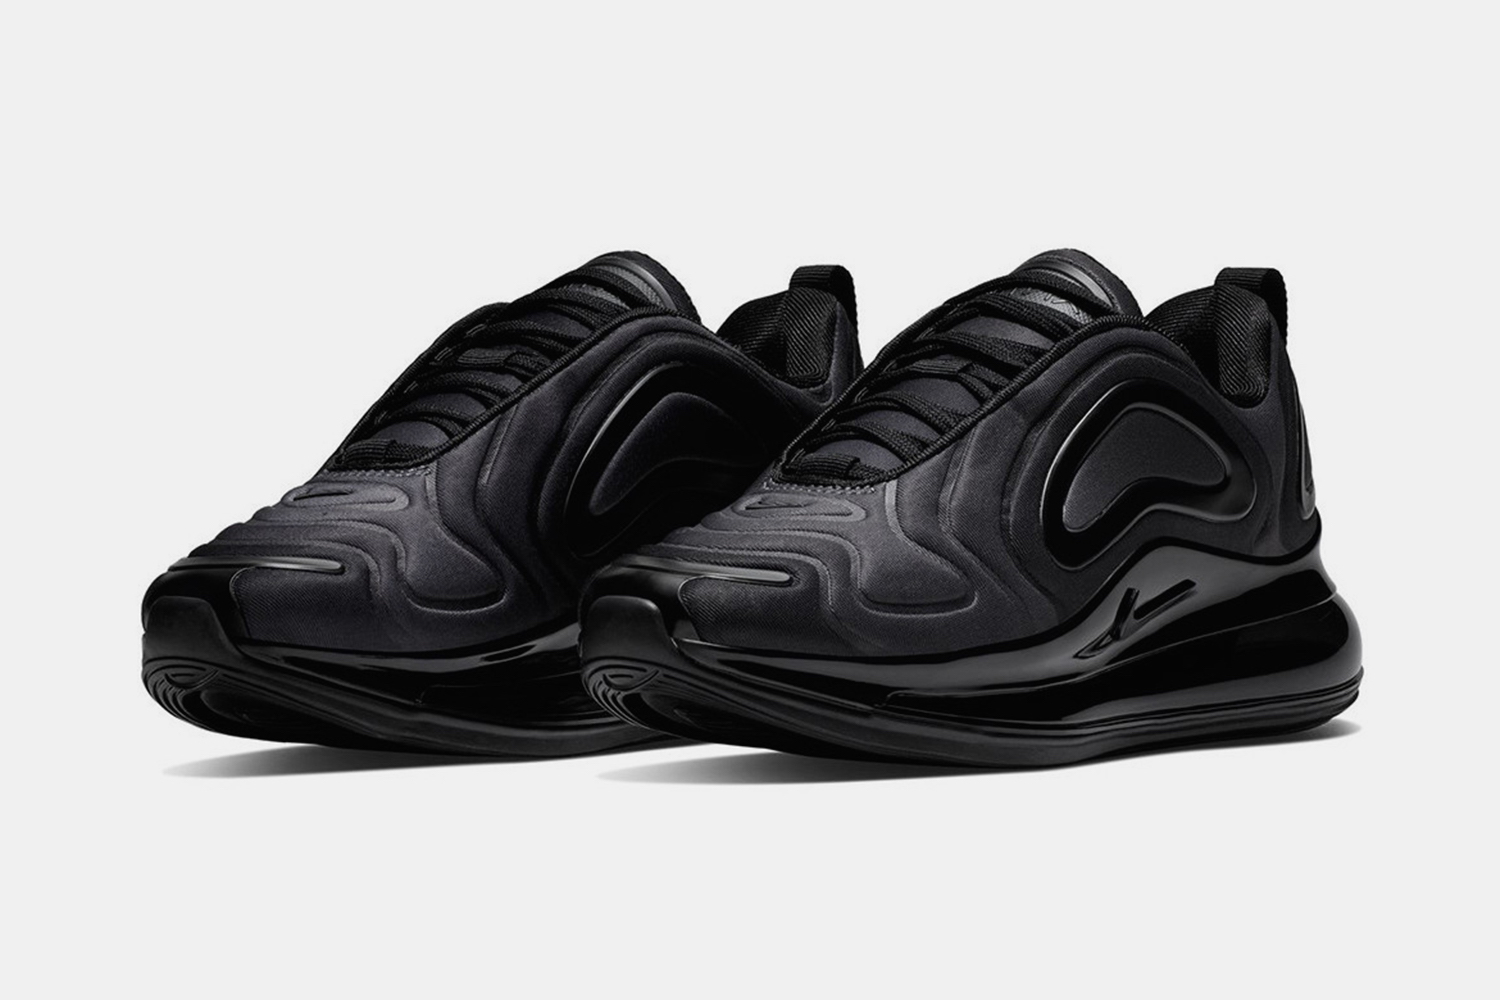 Nike Air Max 720 "Triple Black": Release Date, Pricing & More Info